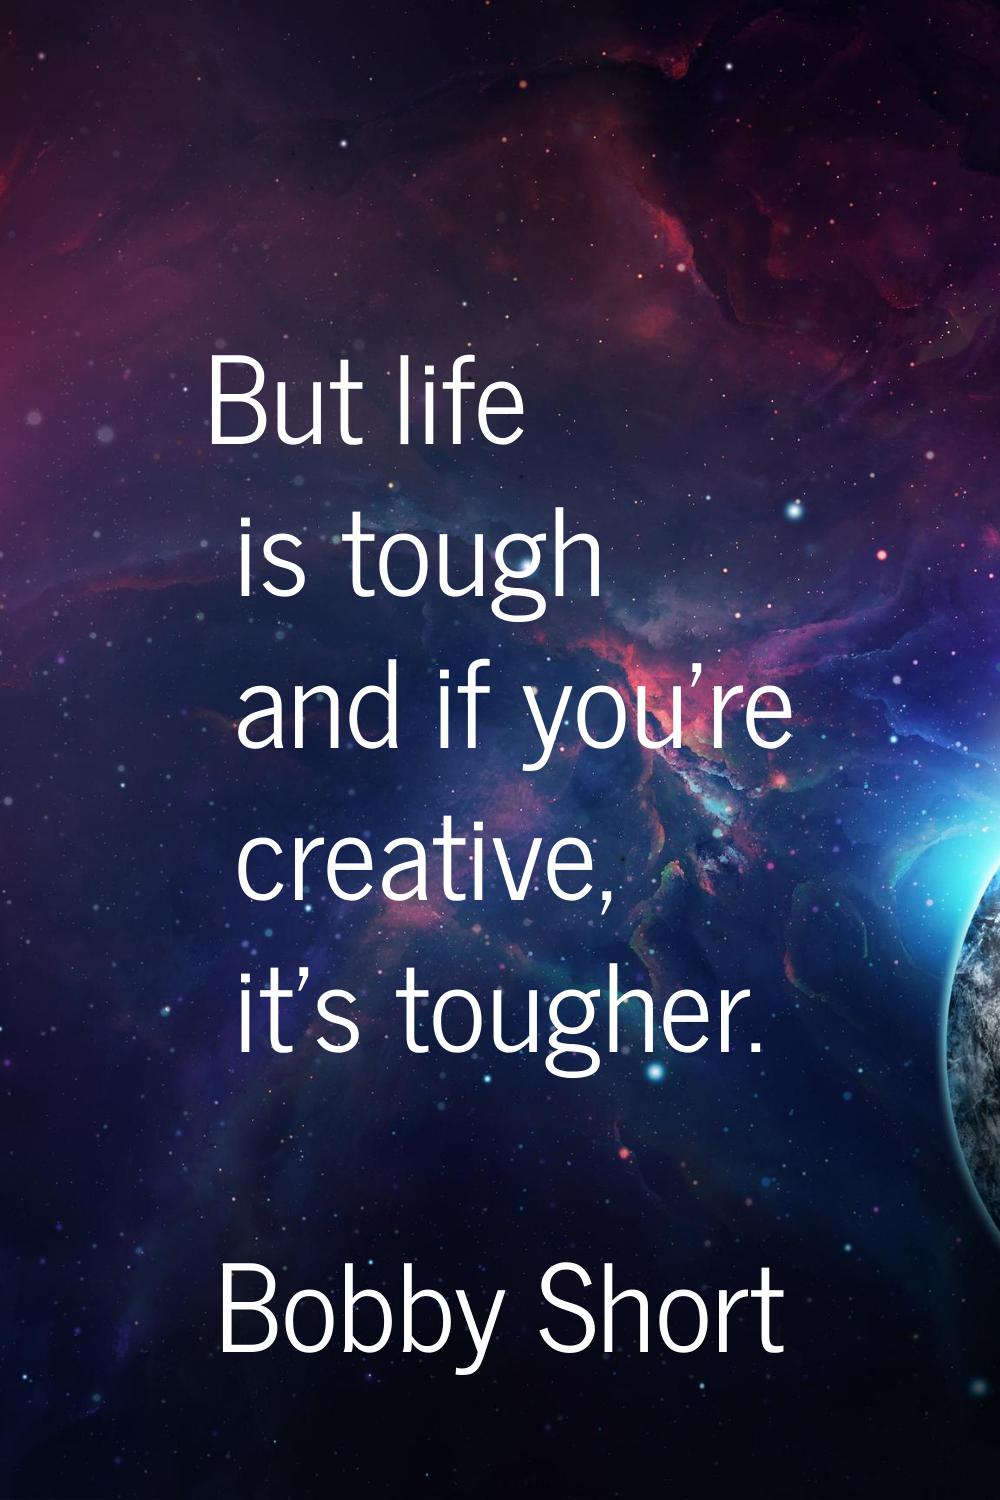 But life is tough and if you're creative, it's tougher.